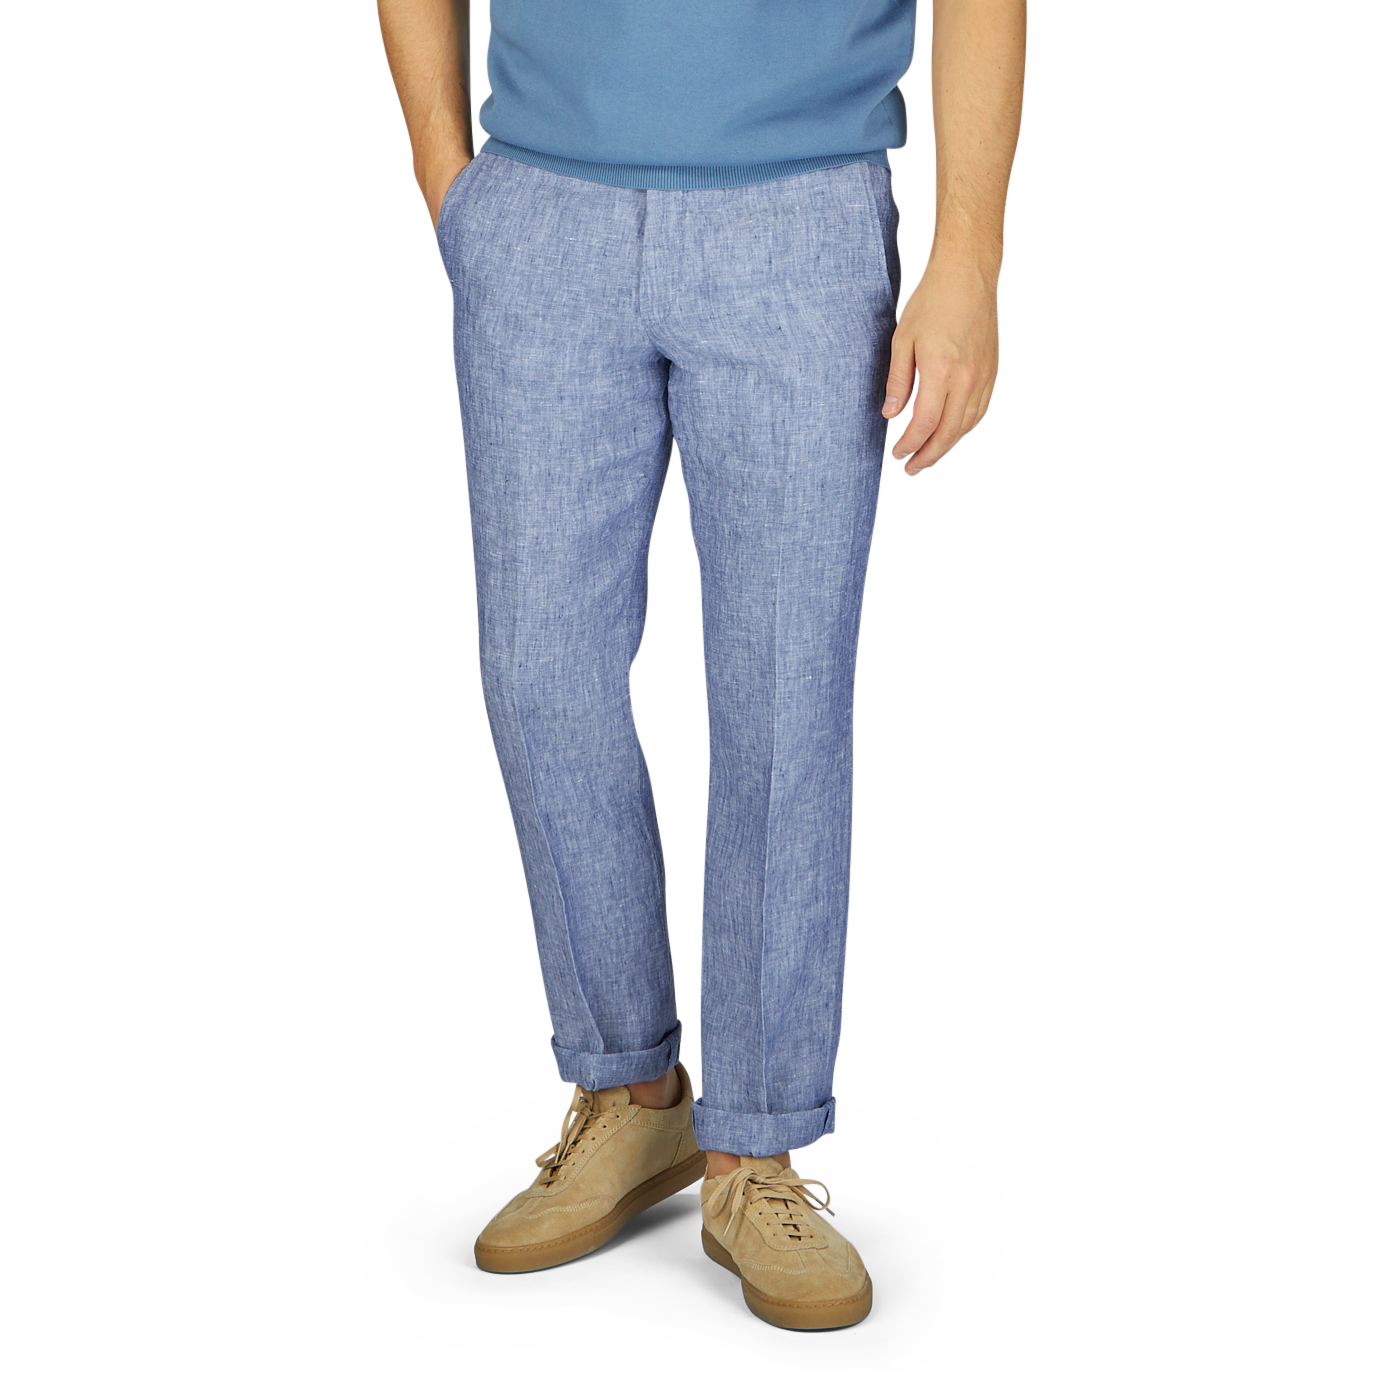 A man wearing light blue washed linen regular fit chinos from Hiltl and beige sneakers stands against a gray backdrop, with only the lower half of his body visible from the waist down.